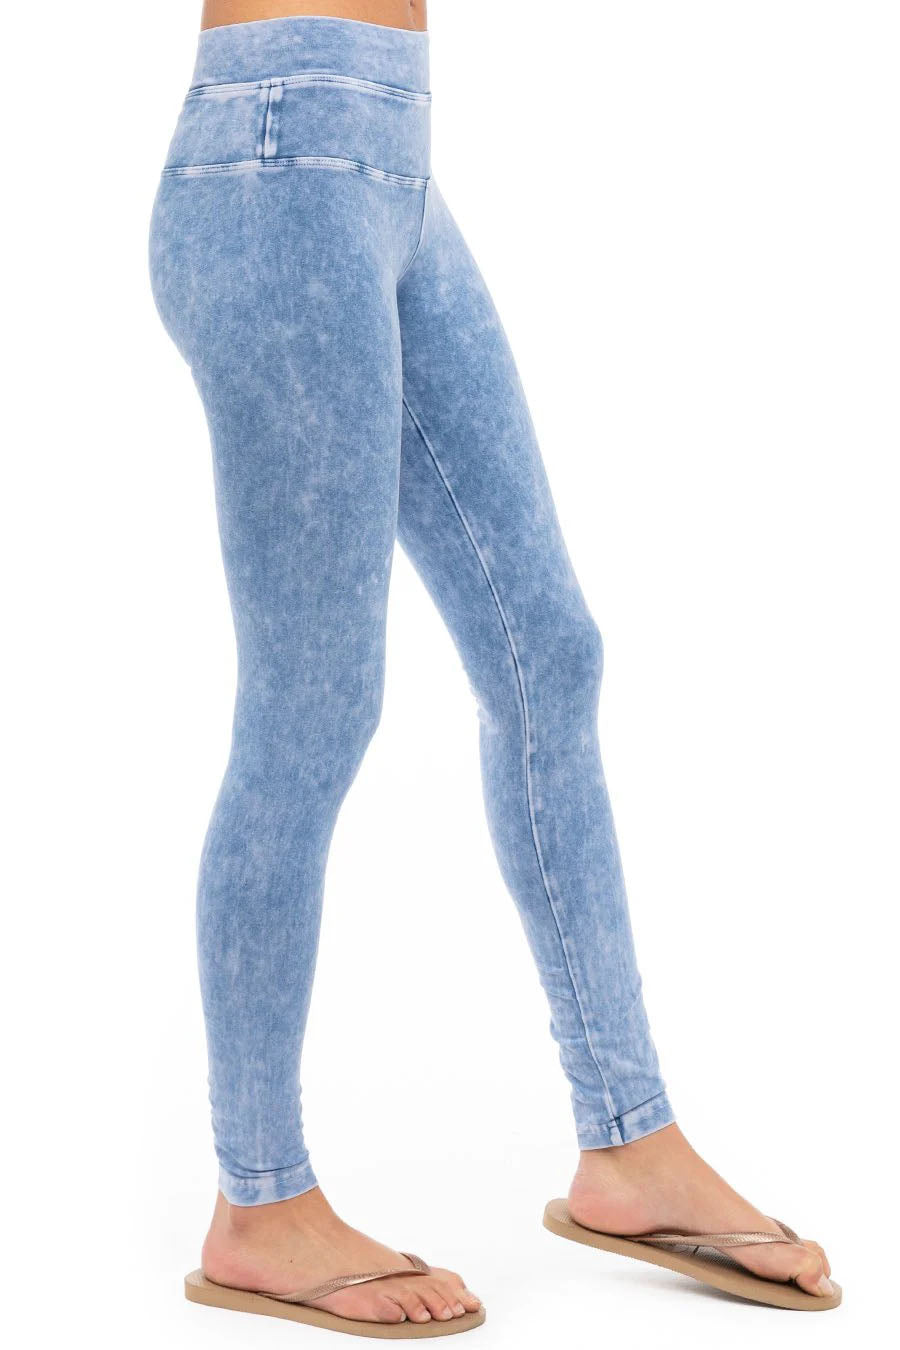 High Rise Ankle Legging (Style W-566, Light Blue Mineral Wash MW7